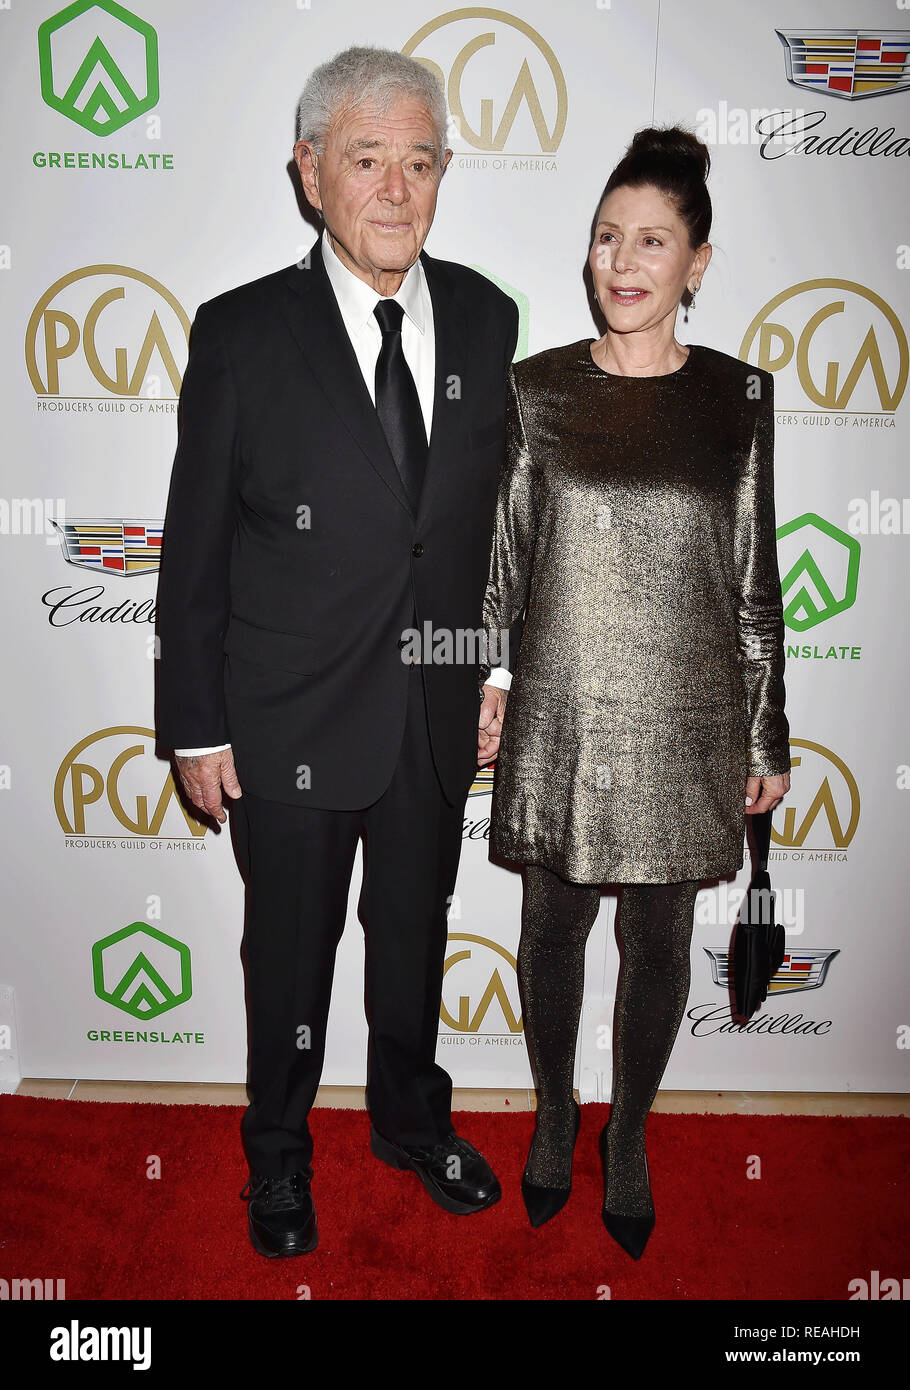 Beverly Hills, California, USA. 19th January, 2019. Richard Donner (L) and Laura Shuler Donner attend the 30th Annual Producers Guild Awards at The Beverly Hilton Hotel on January 19, 2019 in Beverly Hills, California. Credit: Jeffrey Mayer/Alamy Live News Stock Photo